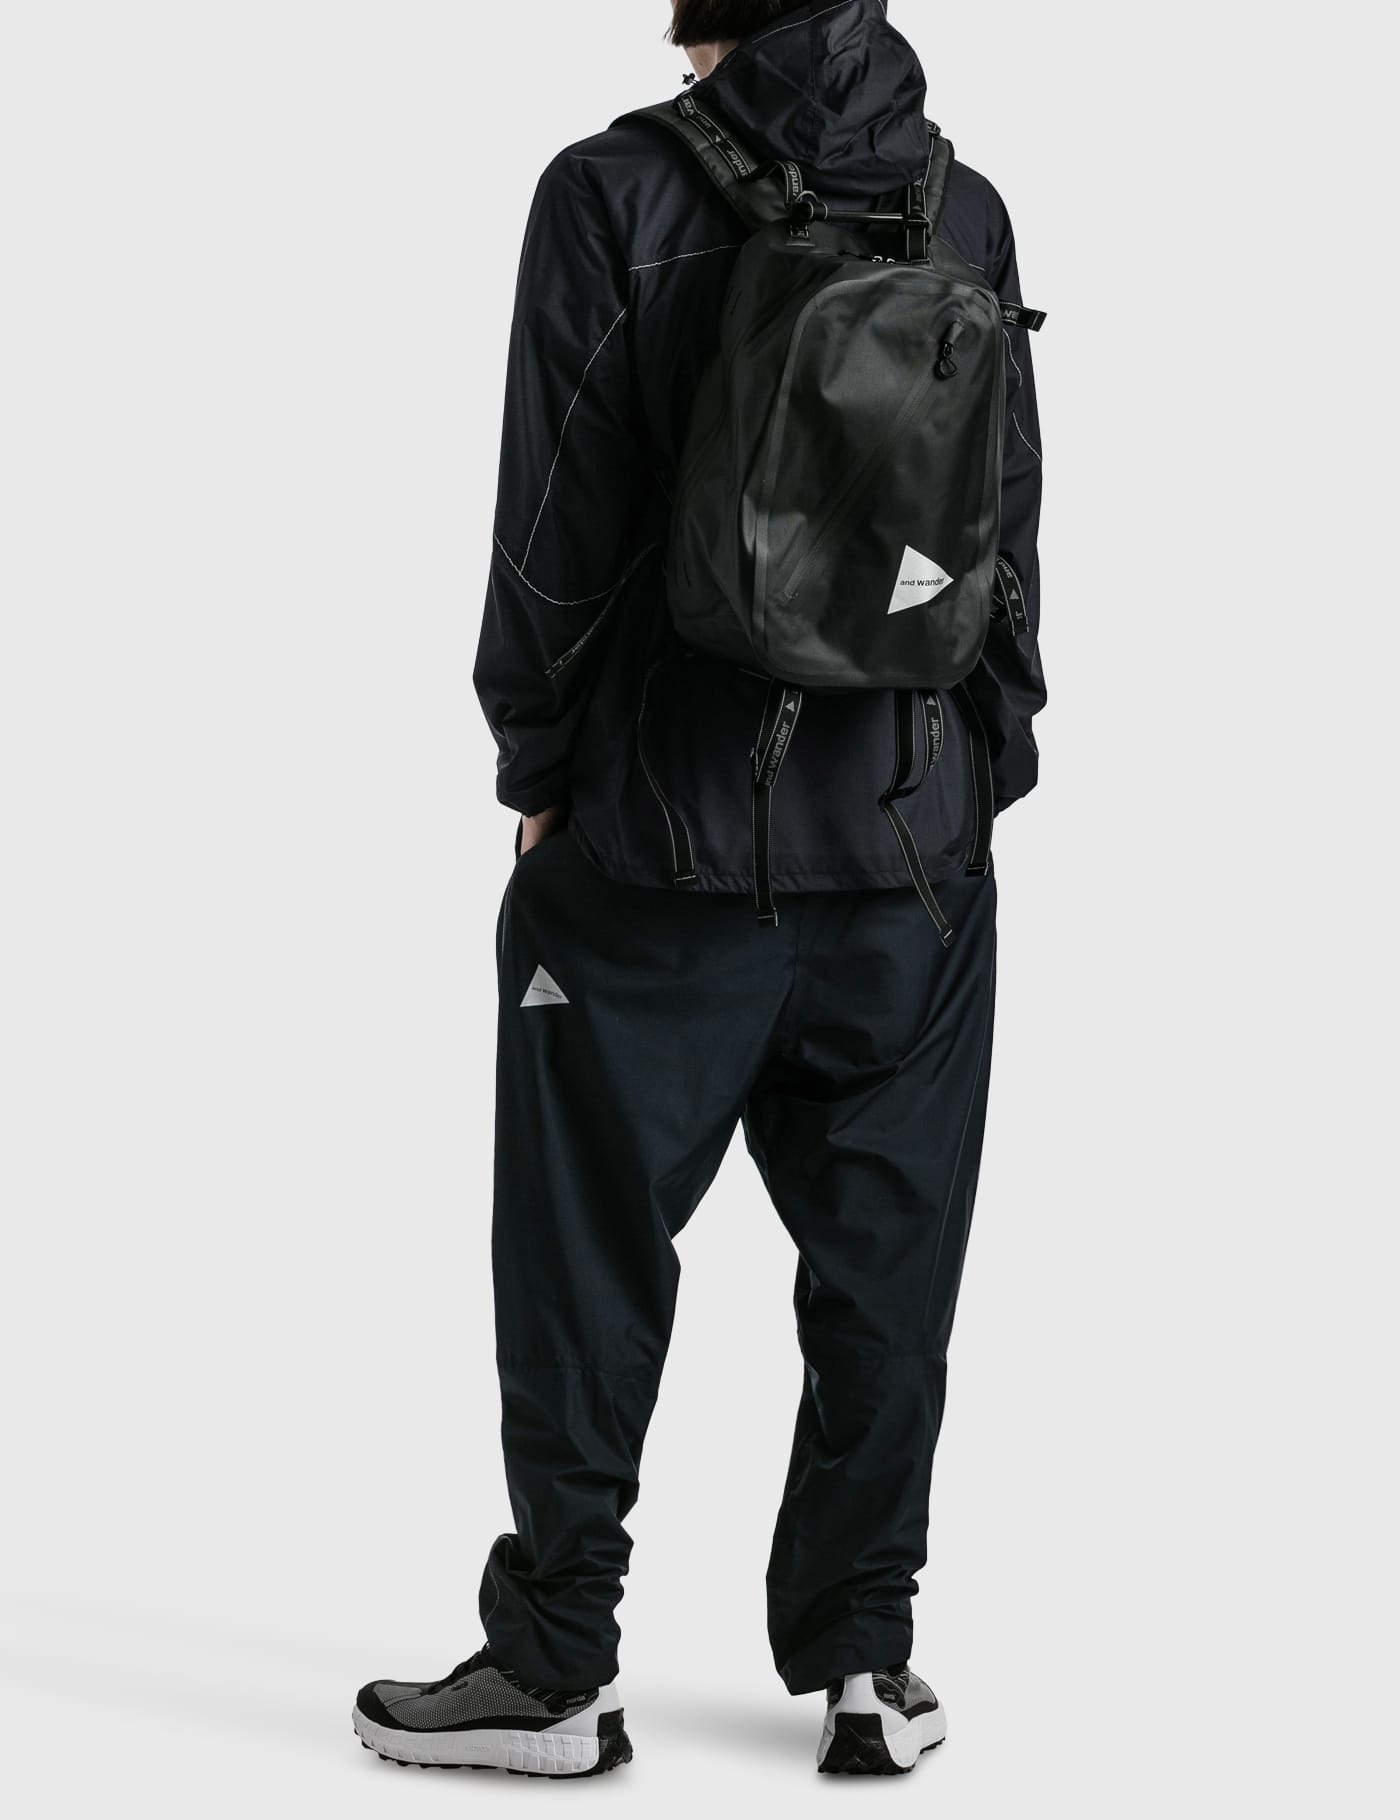 and Wander - Waterproof Daypack | HBX - Globally Curated Fashion 